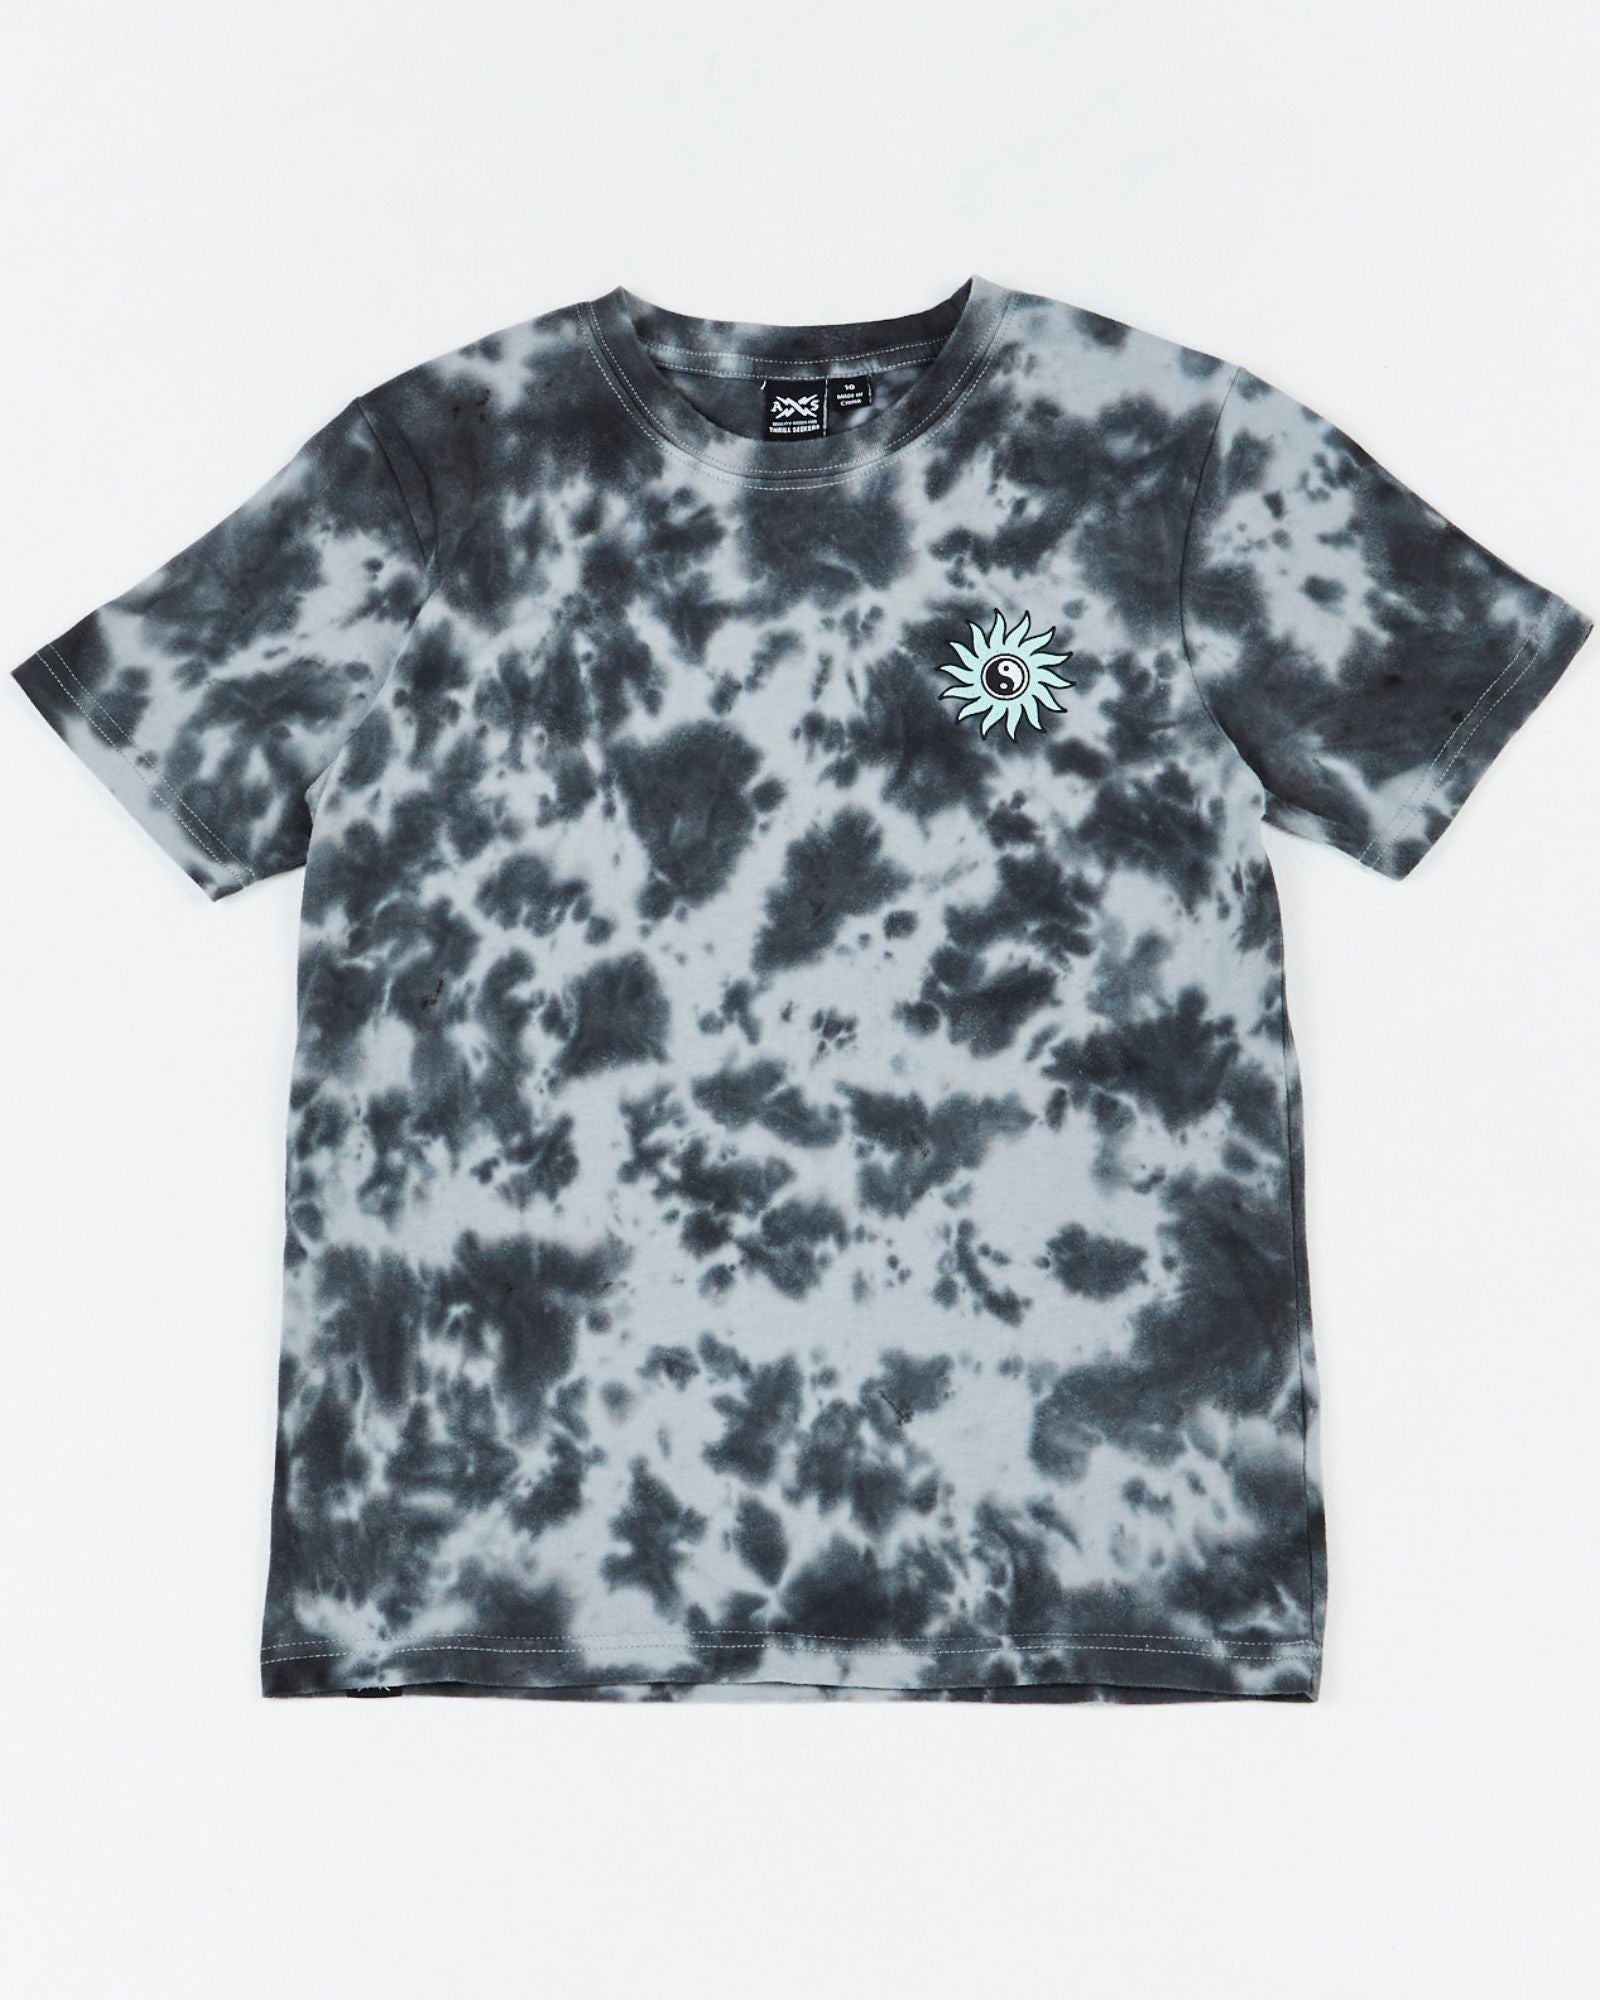 Teen Sunshine Club Tee by Alphabet Soup in grey tie dye colourway for boys aged 8-16. Featuring 100% cotton, short sleeves, regular fit, “Sunshine Club” prints to chest and back.